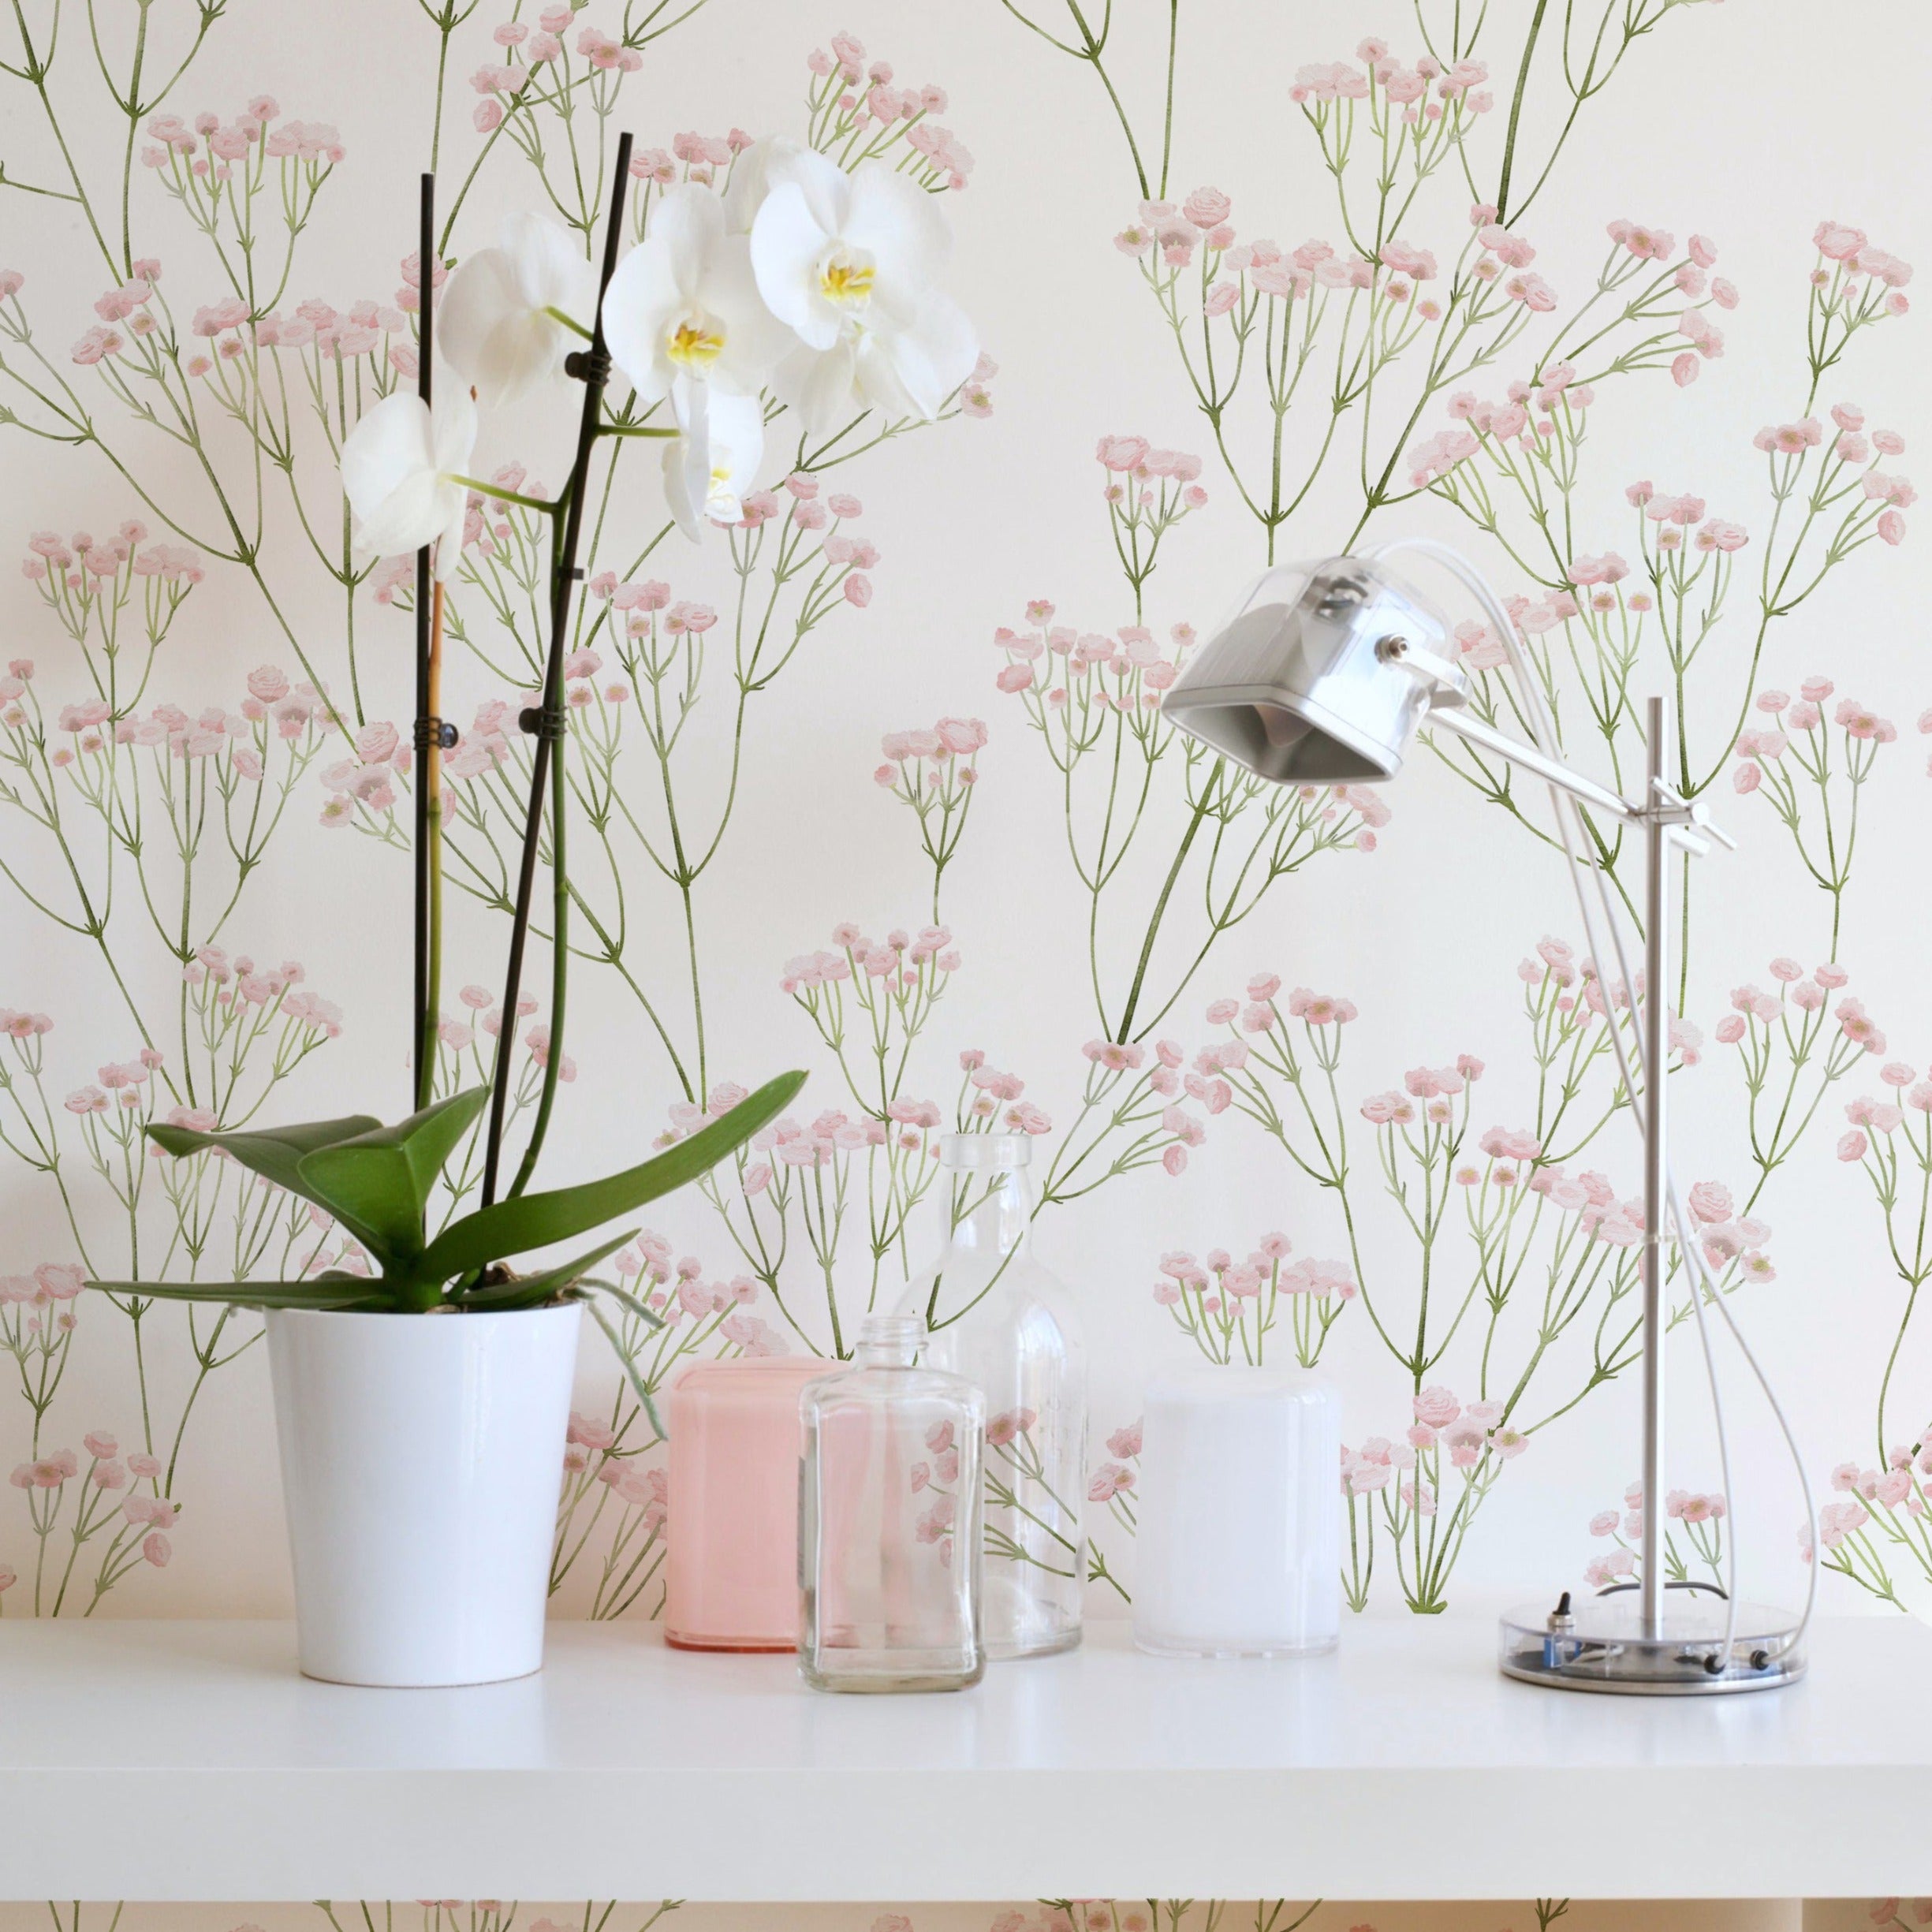 A cozy corner of a room enhanced by the light and airy 'Le Marchand de Fleurs Wallpaper', with its intricate pattern of green stems and pink blossoms. The wallpaper adds a romantic, garden-inspired atmosphere, complemented by an elegant white orchid and simple beauty accessories on a white shelf.